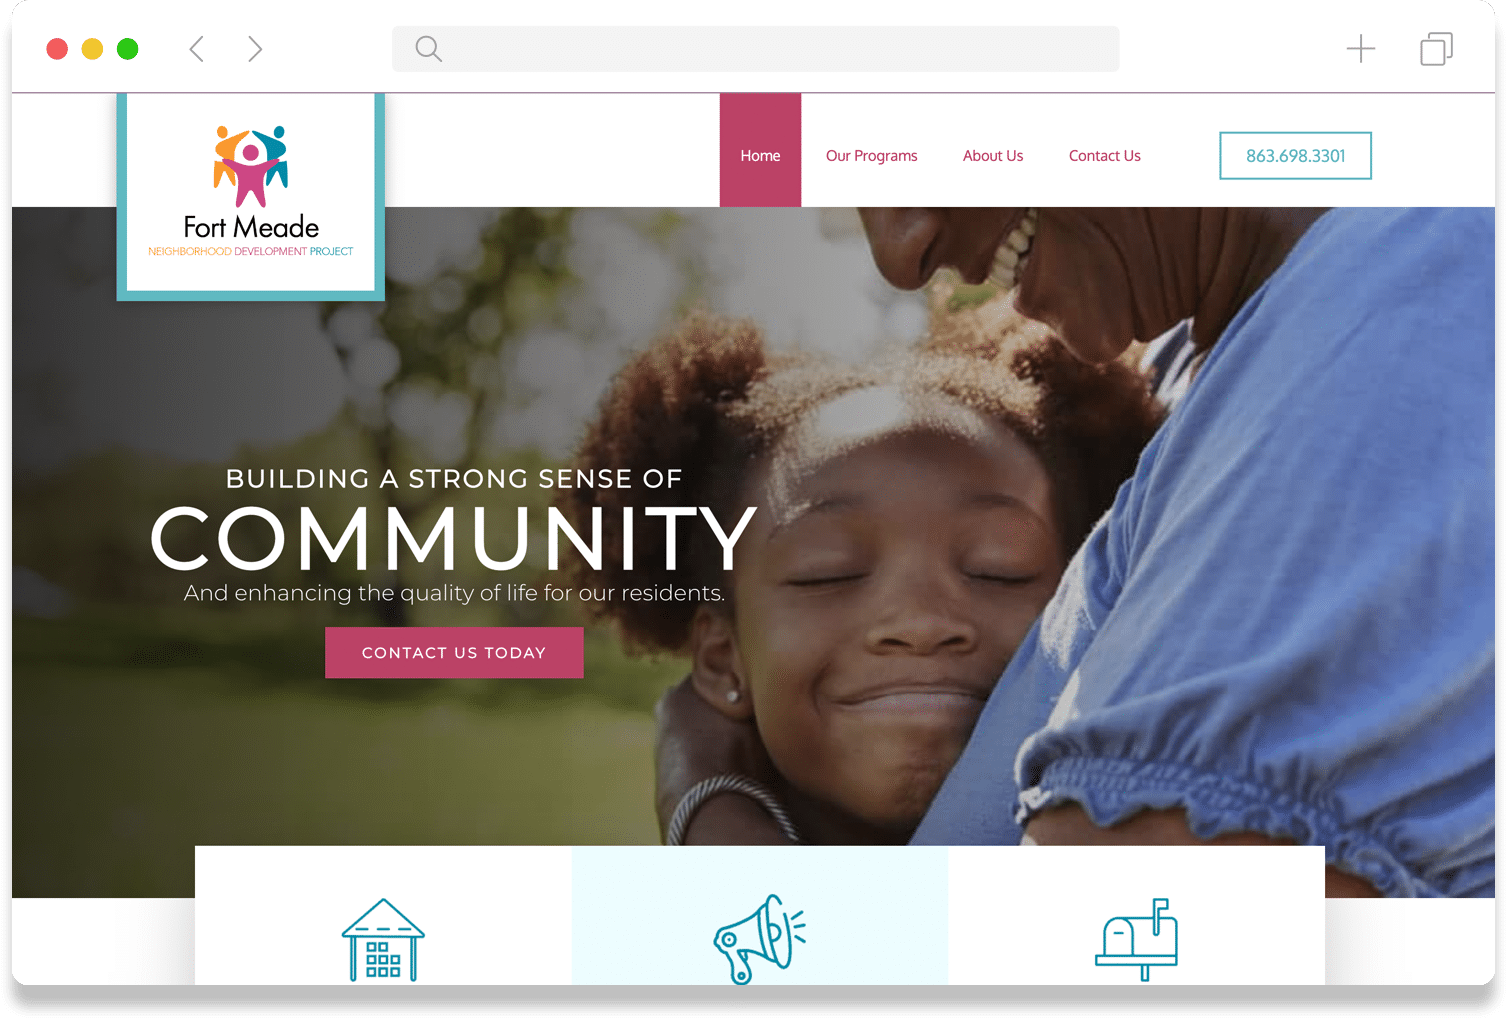 A portfolio photo showing the Fort Meade Neighborhood Development Project website designed by DigiSquid